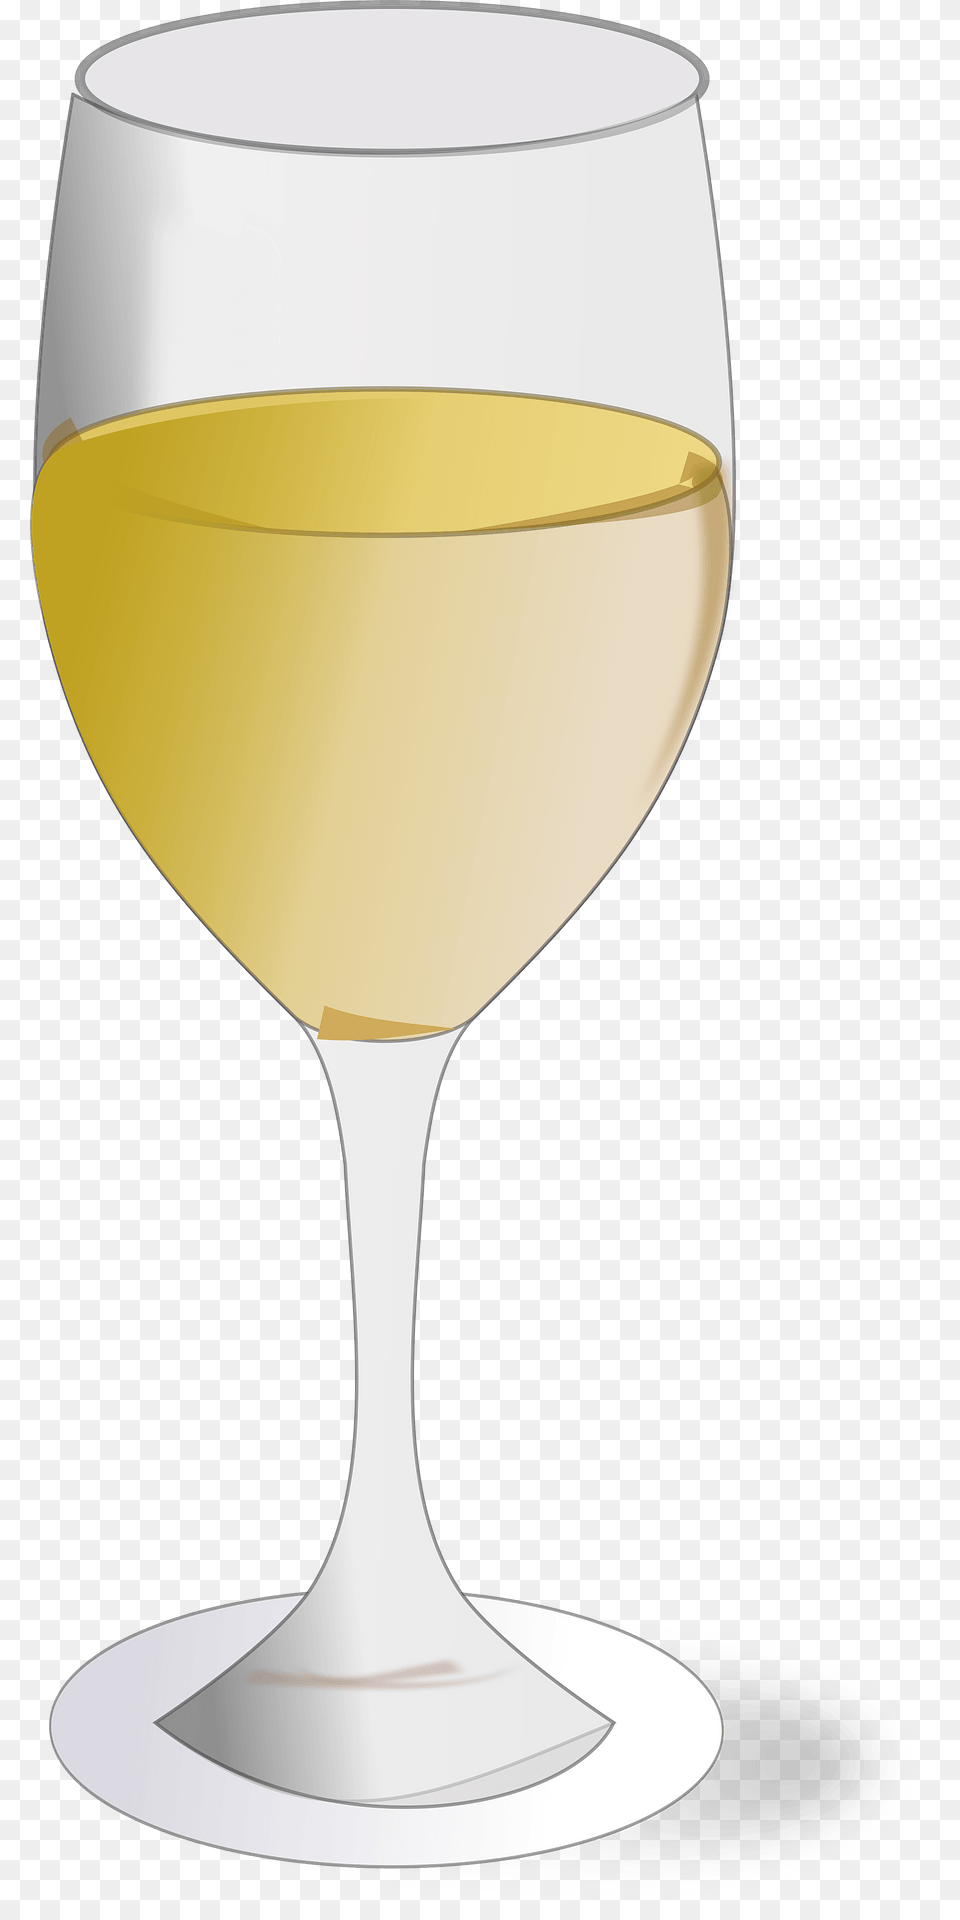 Wine Glass Half Filled With White Wine Clipart, Alcohol, Beverage, Liquor, Wine Glass Free Png